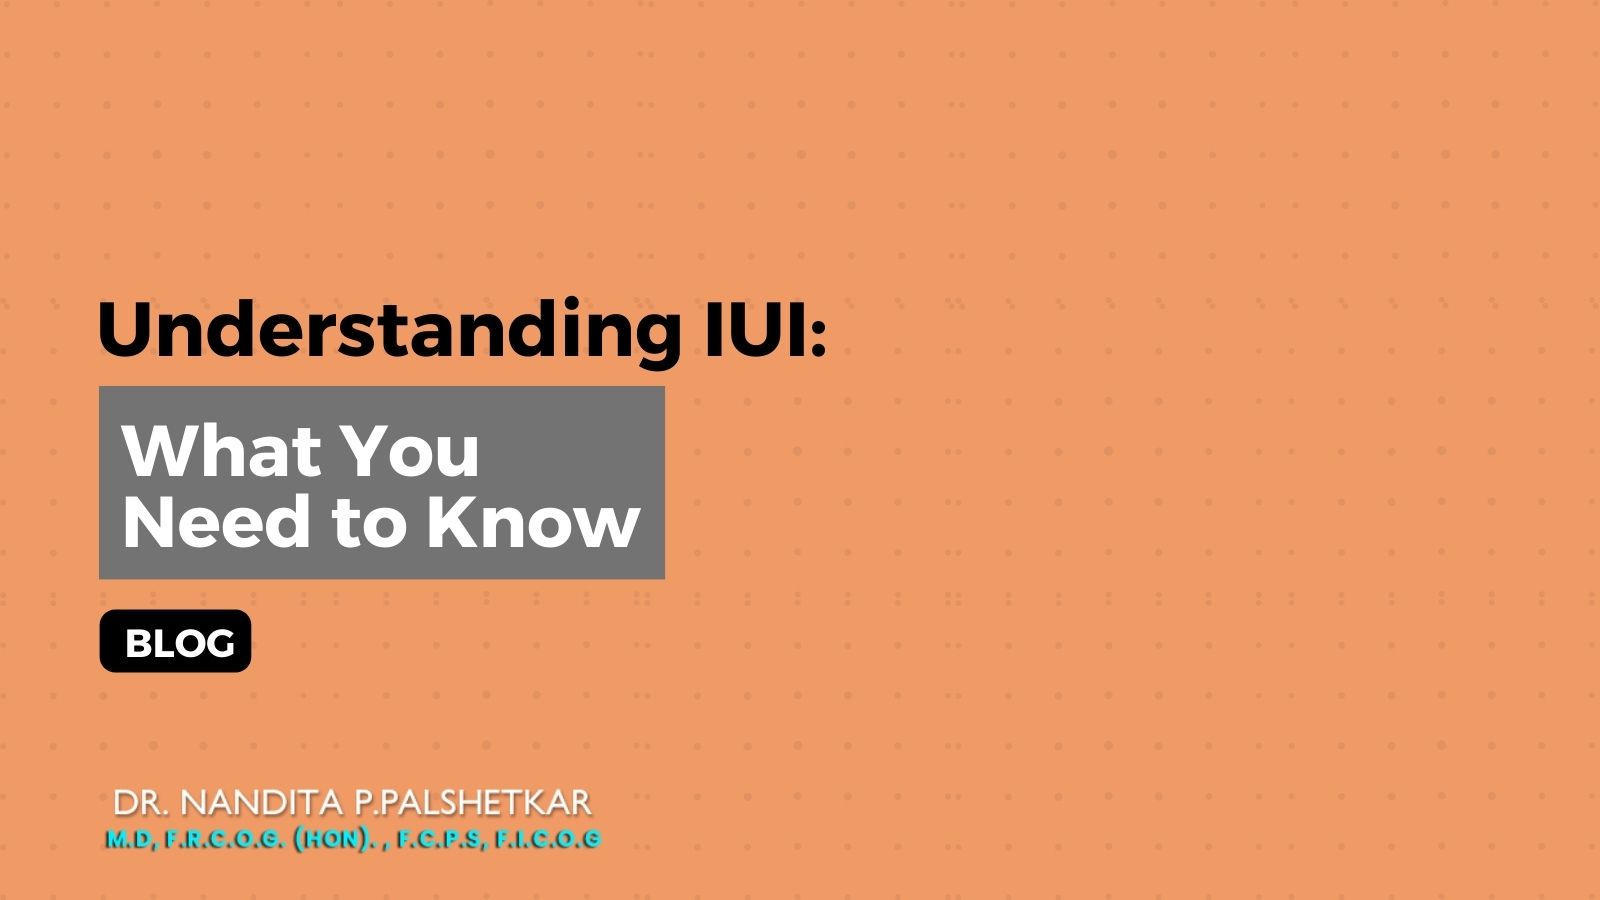 Understanding IUI: What You Need to Know